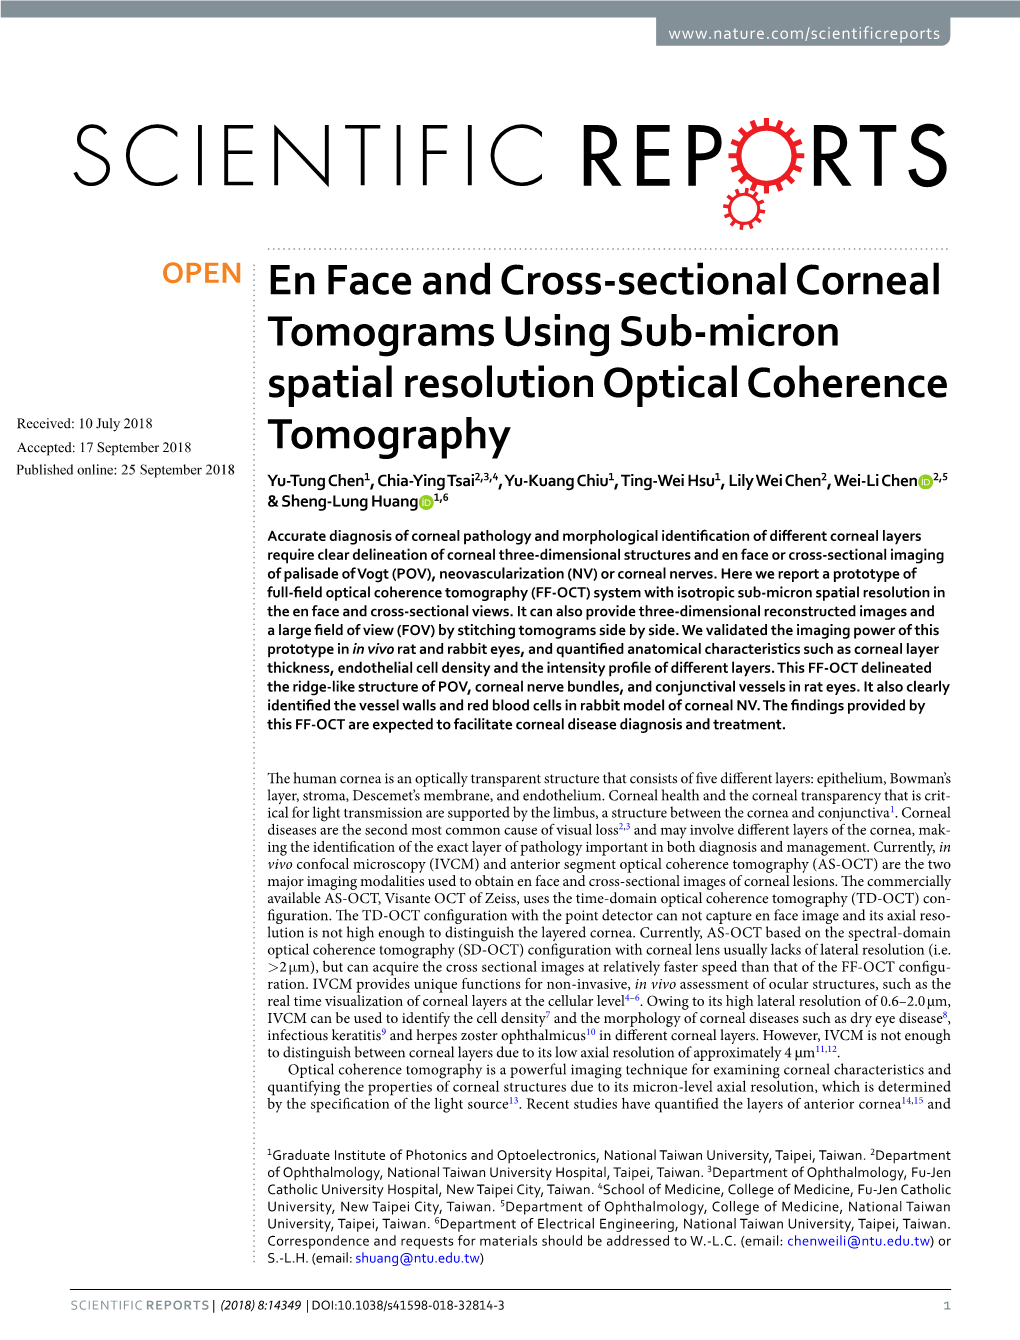 En Face and Cross-Sectional Corneal Tomograms Using Sub-Micron